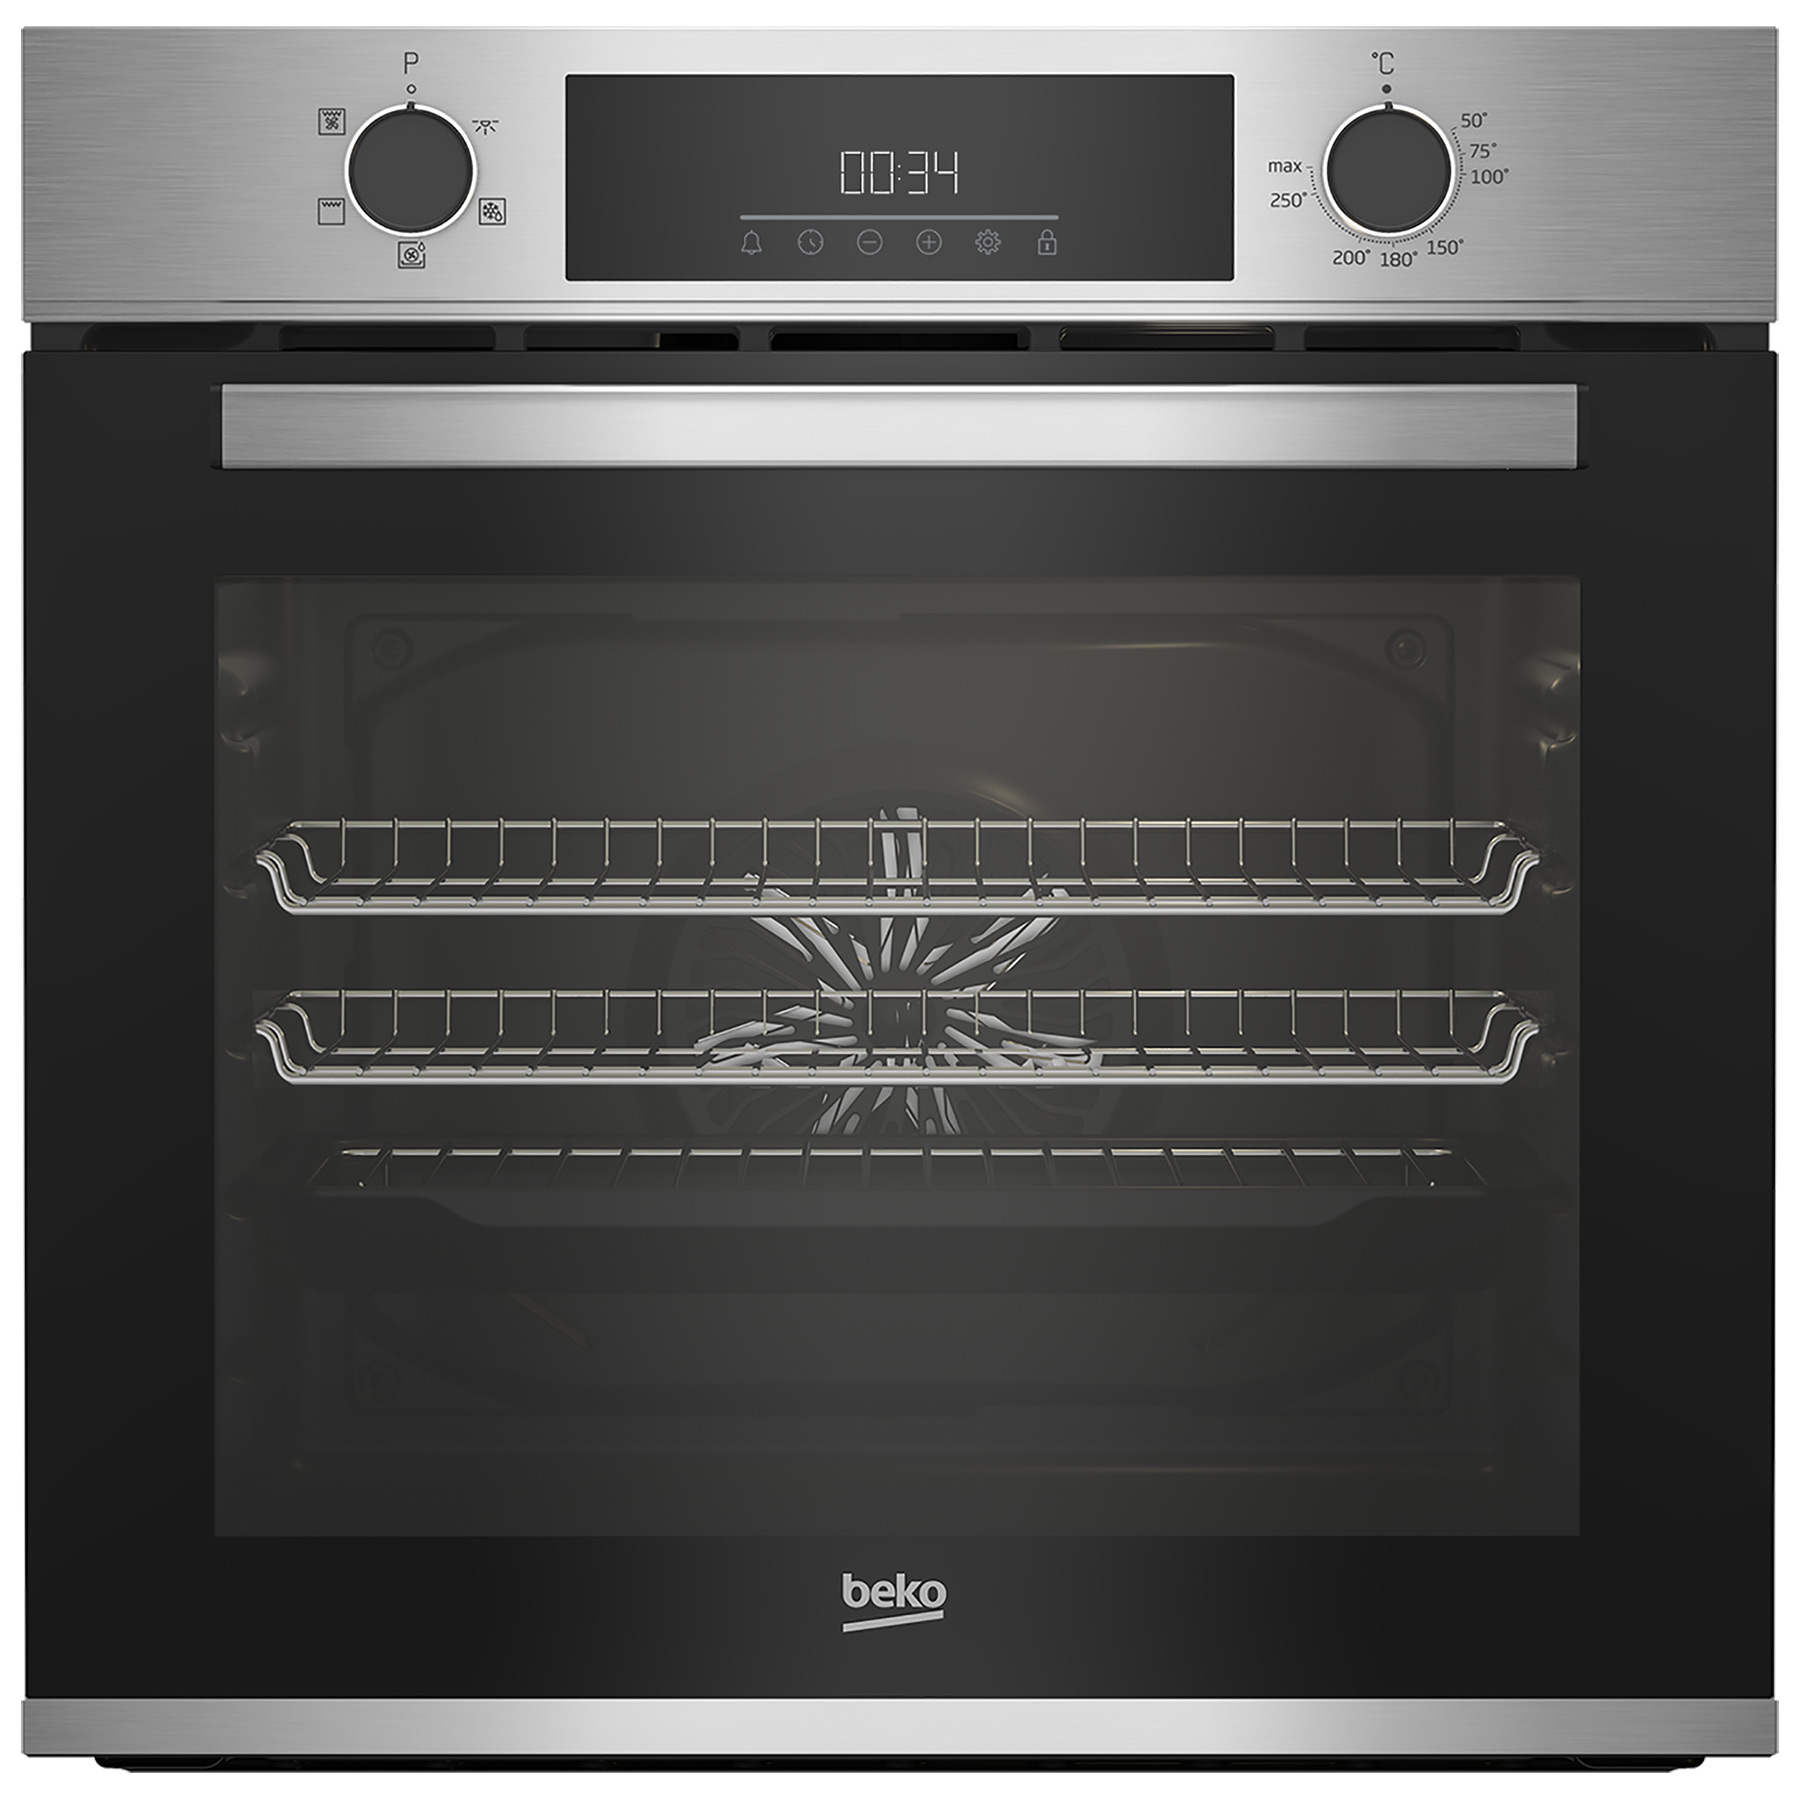 Image of Beko CIFY81X Built In Electric Single Oven in St Steel 66L A Rated